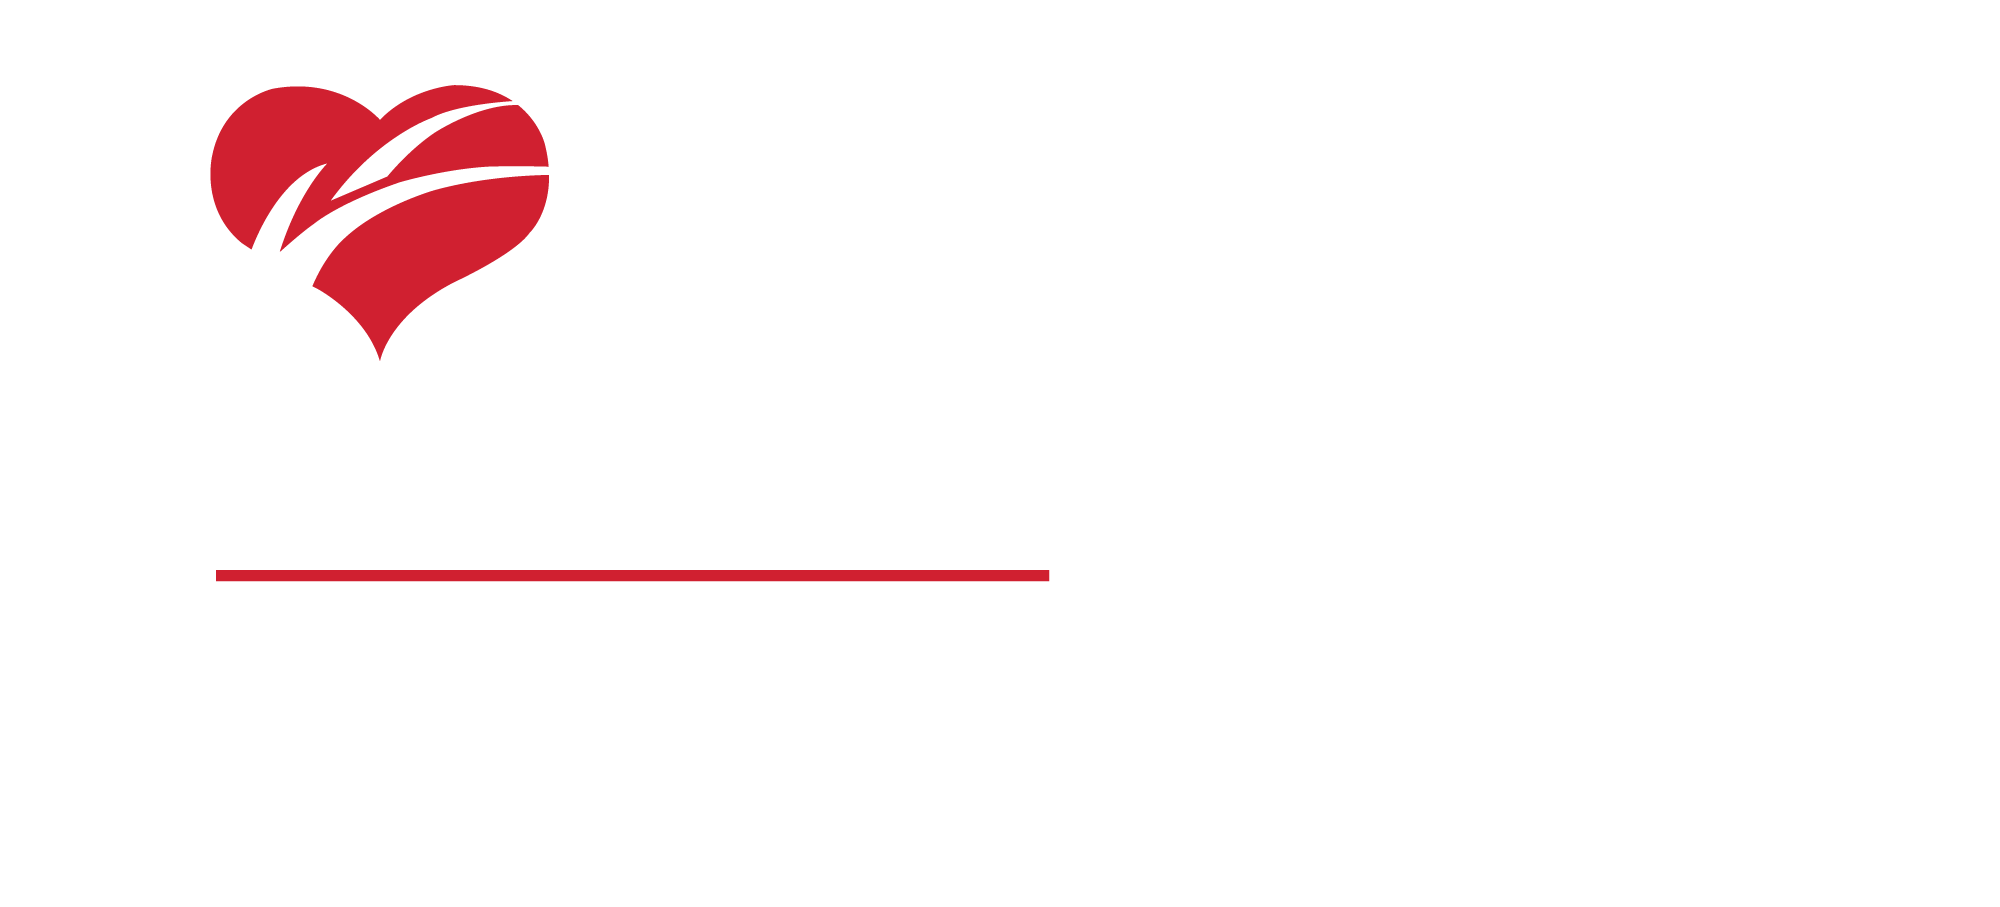 Prairie Education and Research Cooperative - Department of Continuing Education